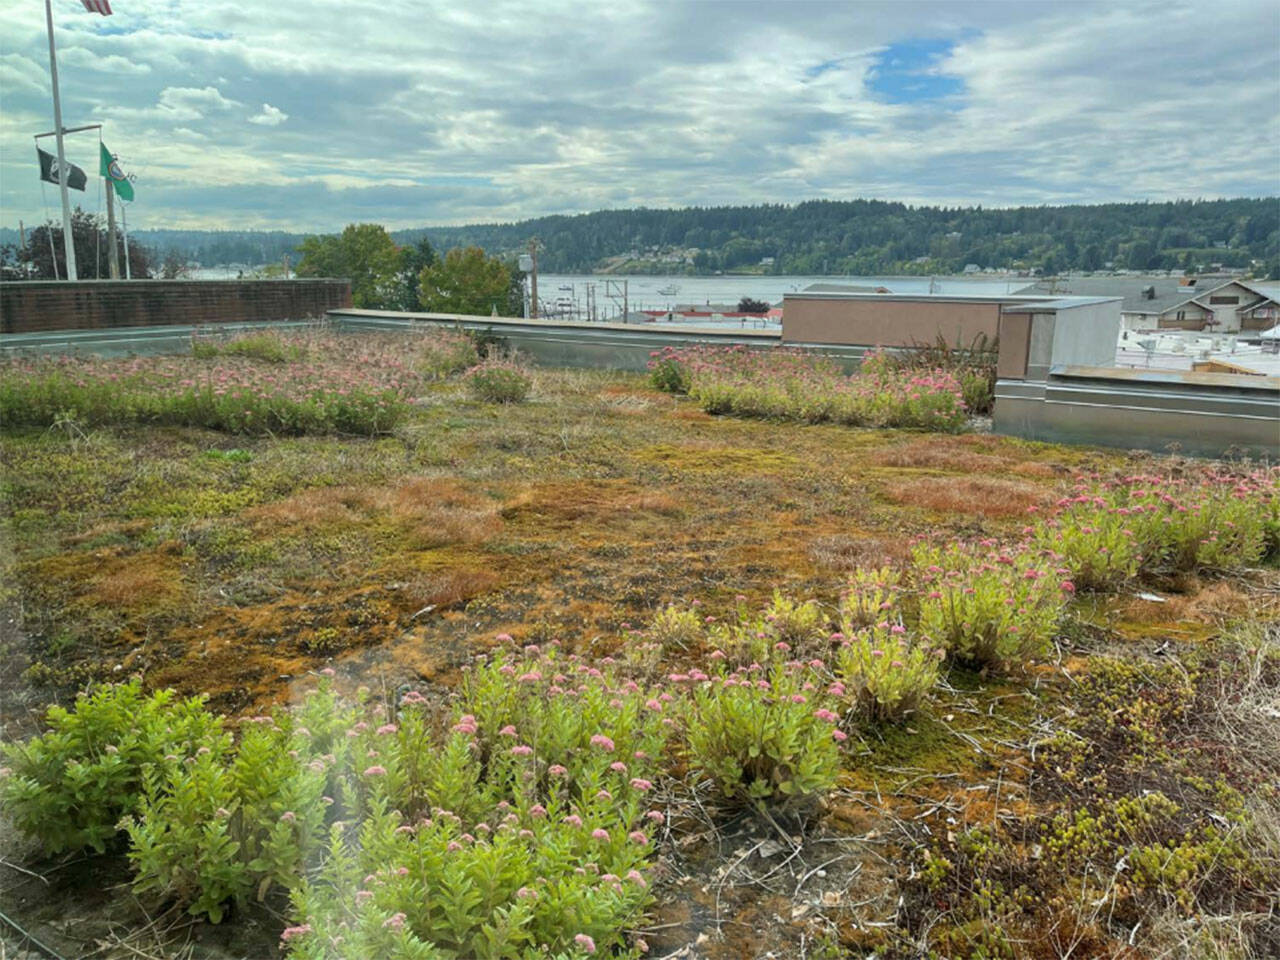 The second-floor green roof at Poulsbo City Hall is overgrown with weeds. Courtesy photo